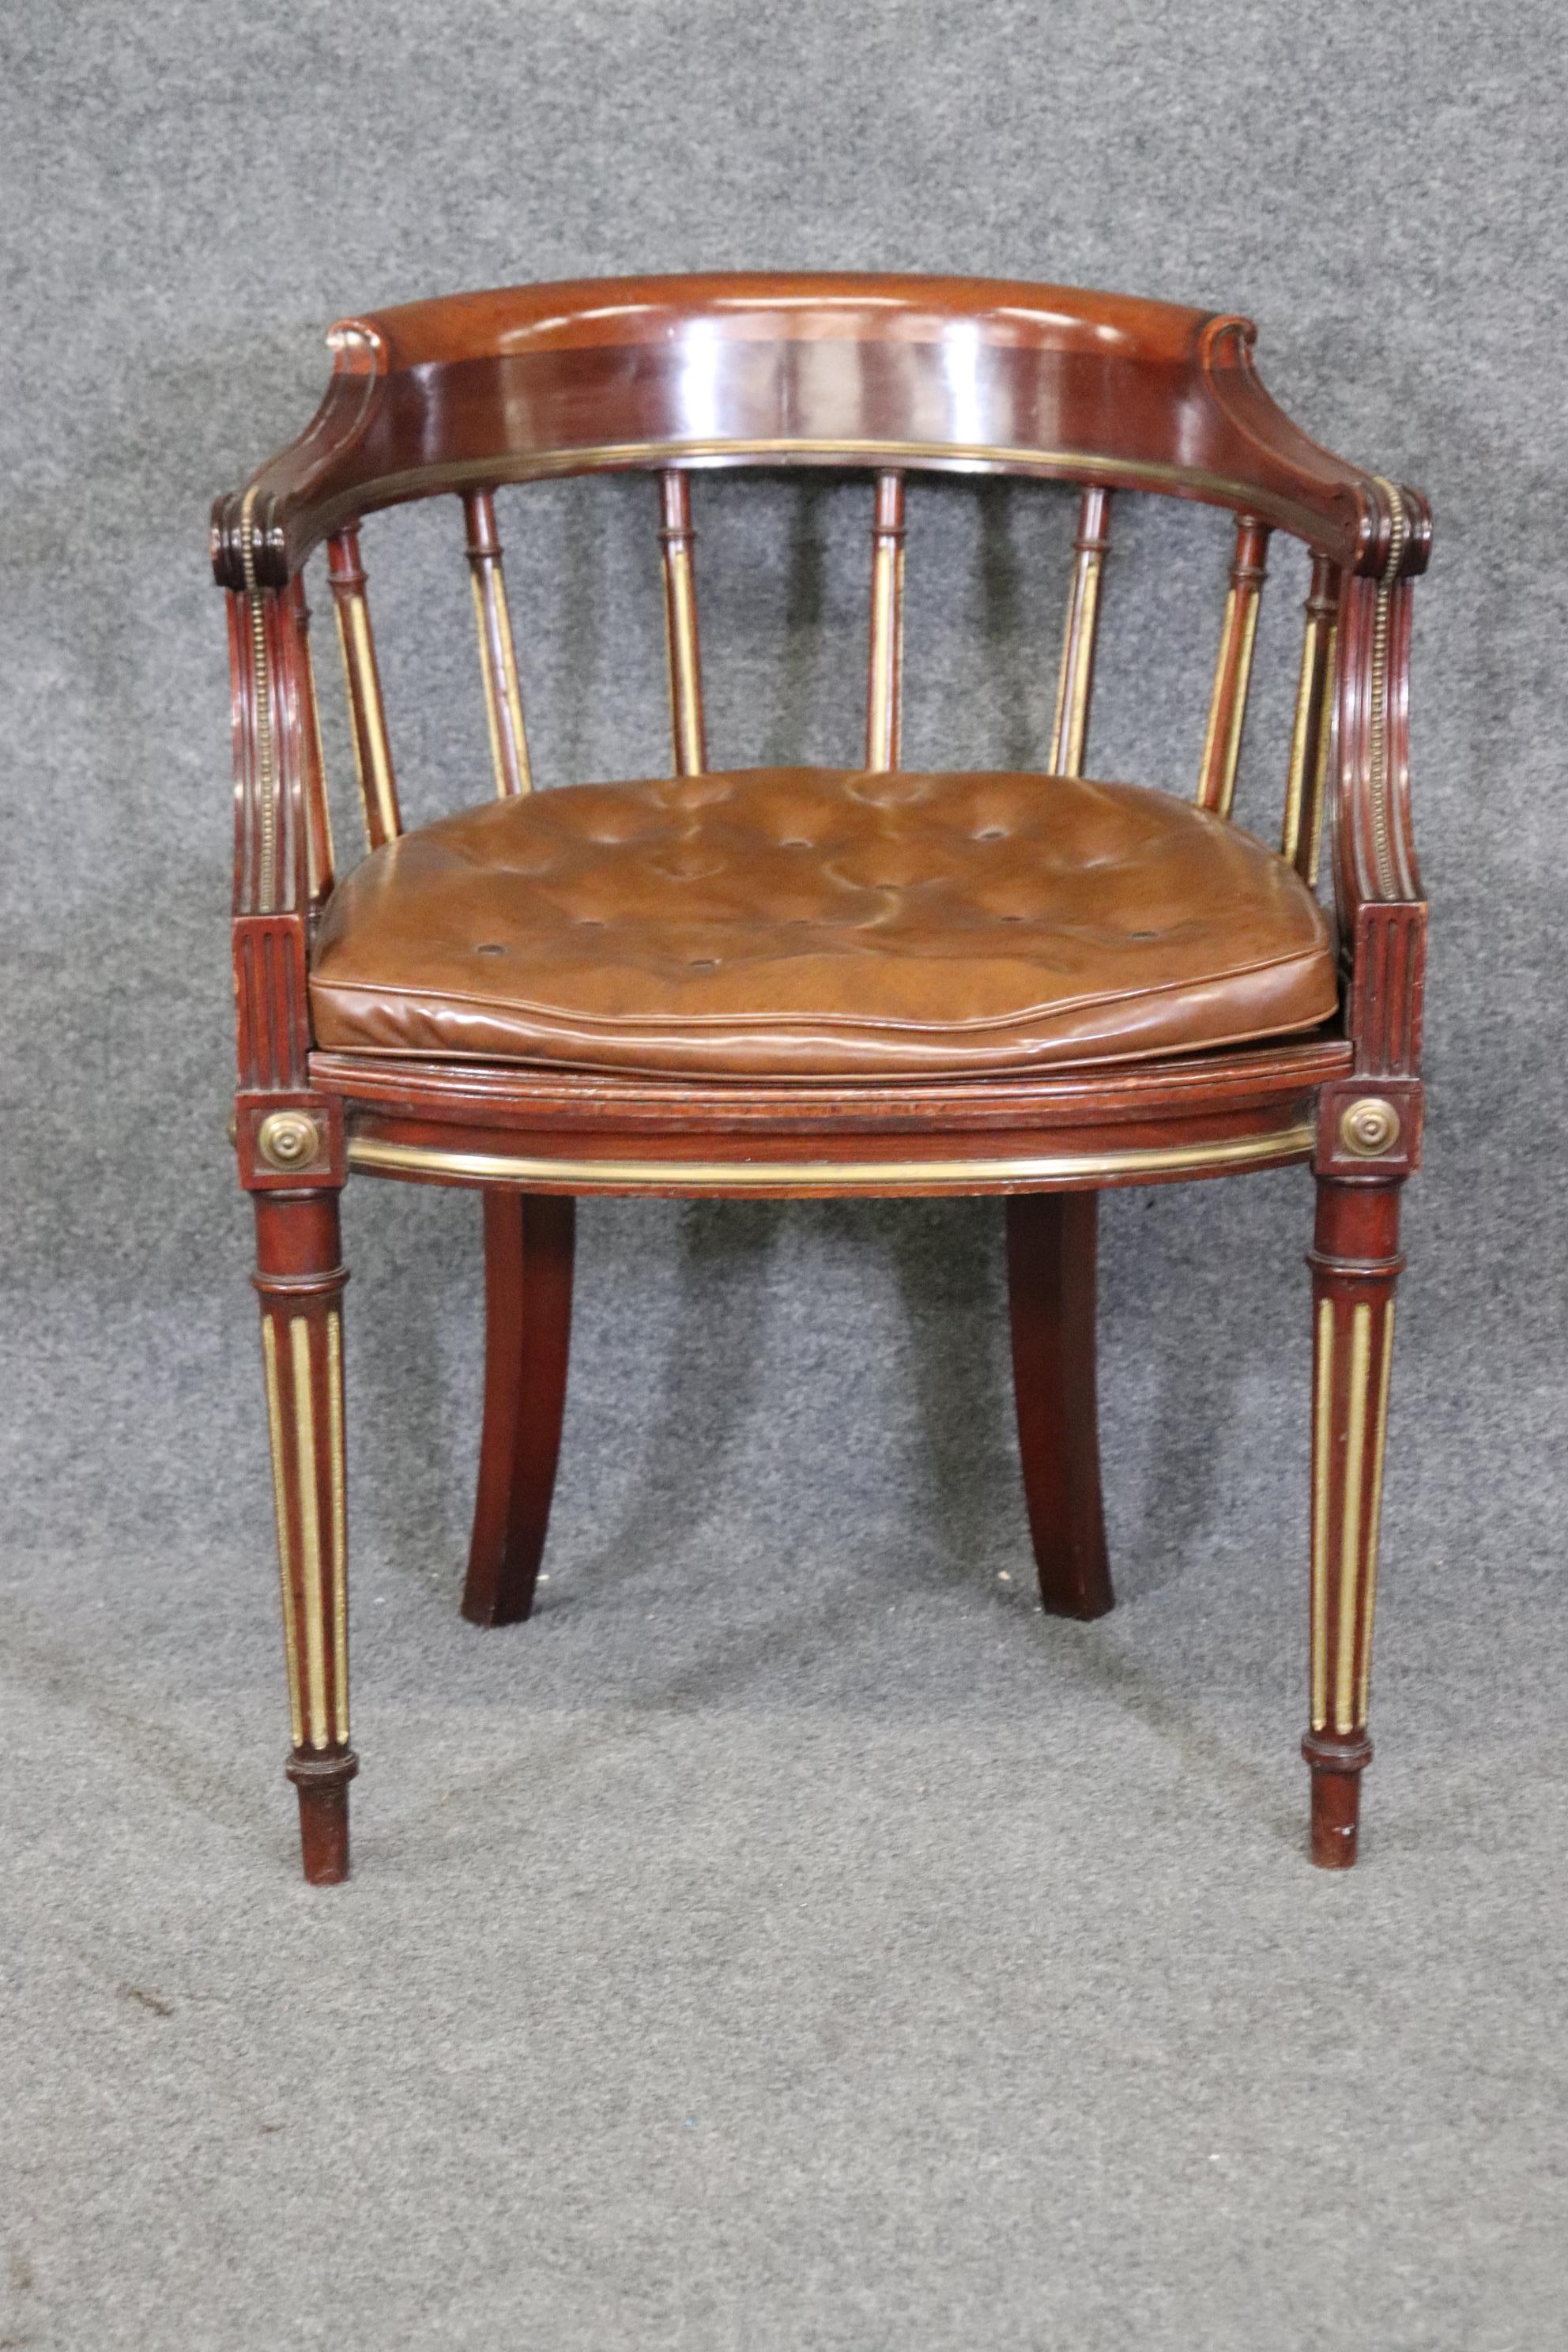 Dimensions: Height: 30 3/4 in Width: 24 in Depth: 23in Seat Height: 19 1/4 in 

This antique 19th century Louis XVI style armchair club chair is made of the highest quality! This chair is equipped with a leather tufted cushion. If you look at the